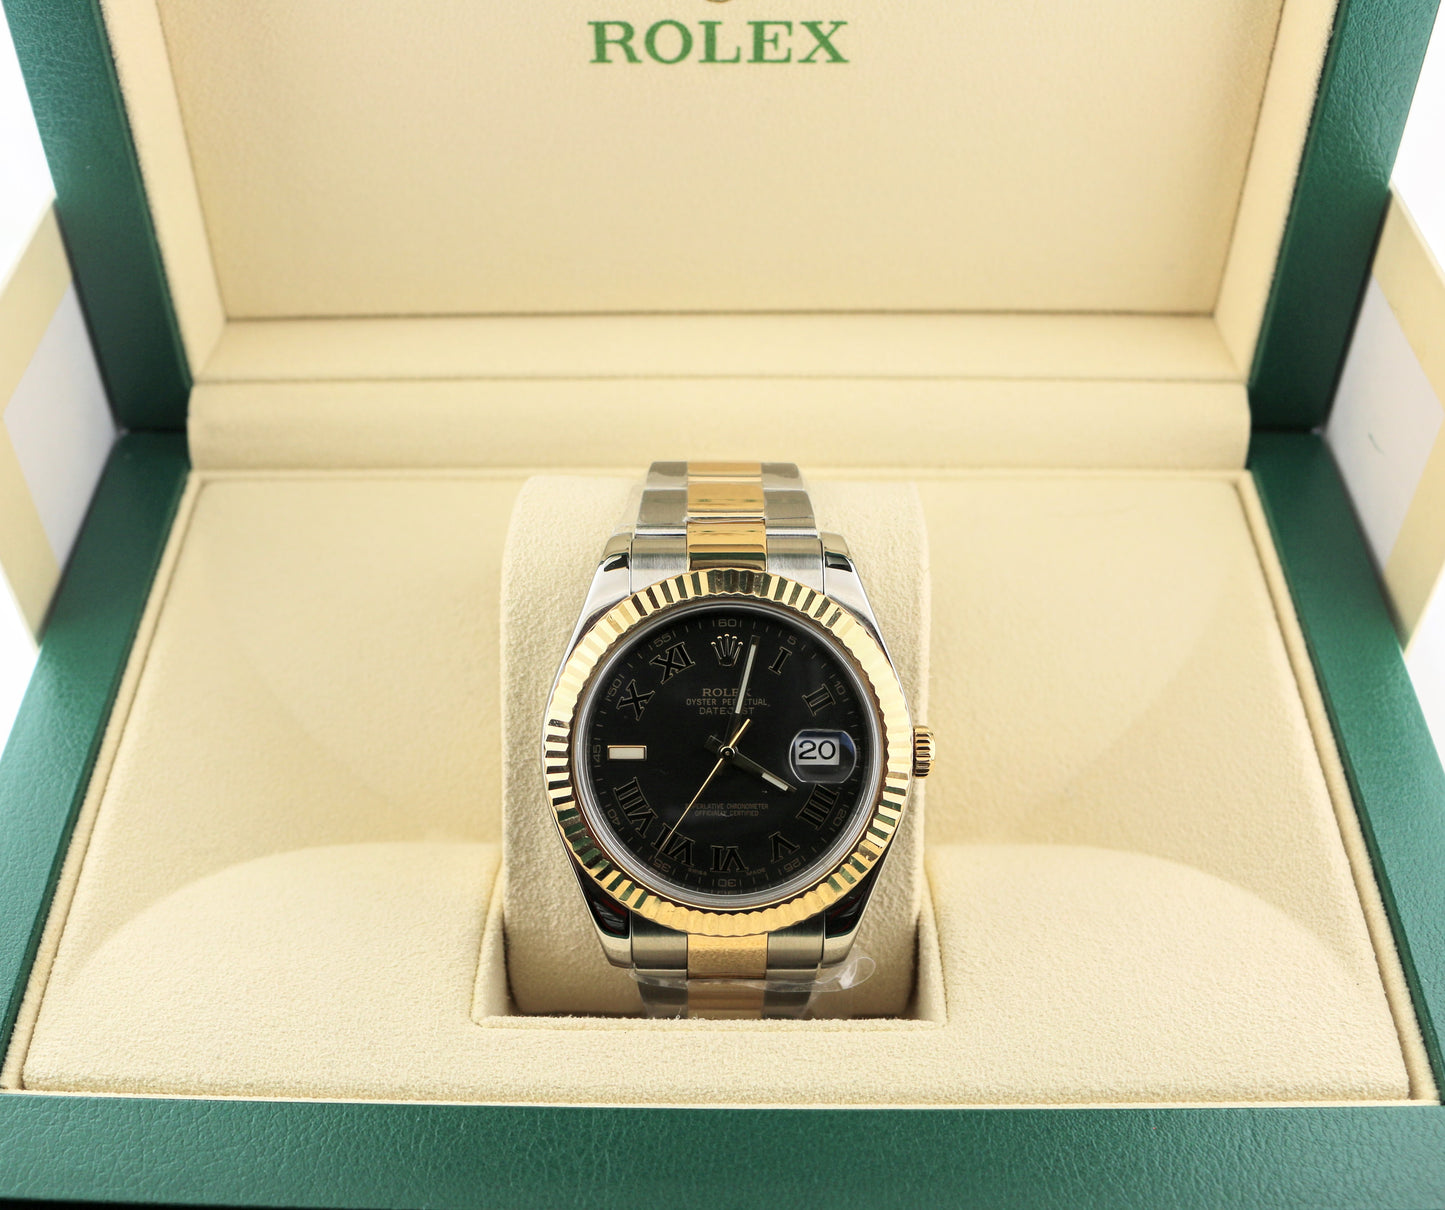 2014 Rolex Datejust 116333 Black Roman Dial TT Oyster No Papers 41mm